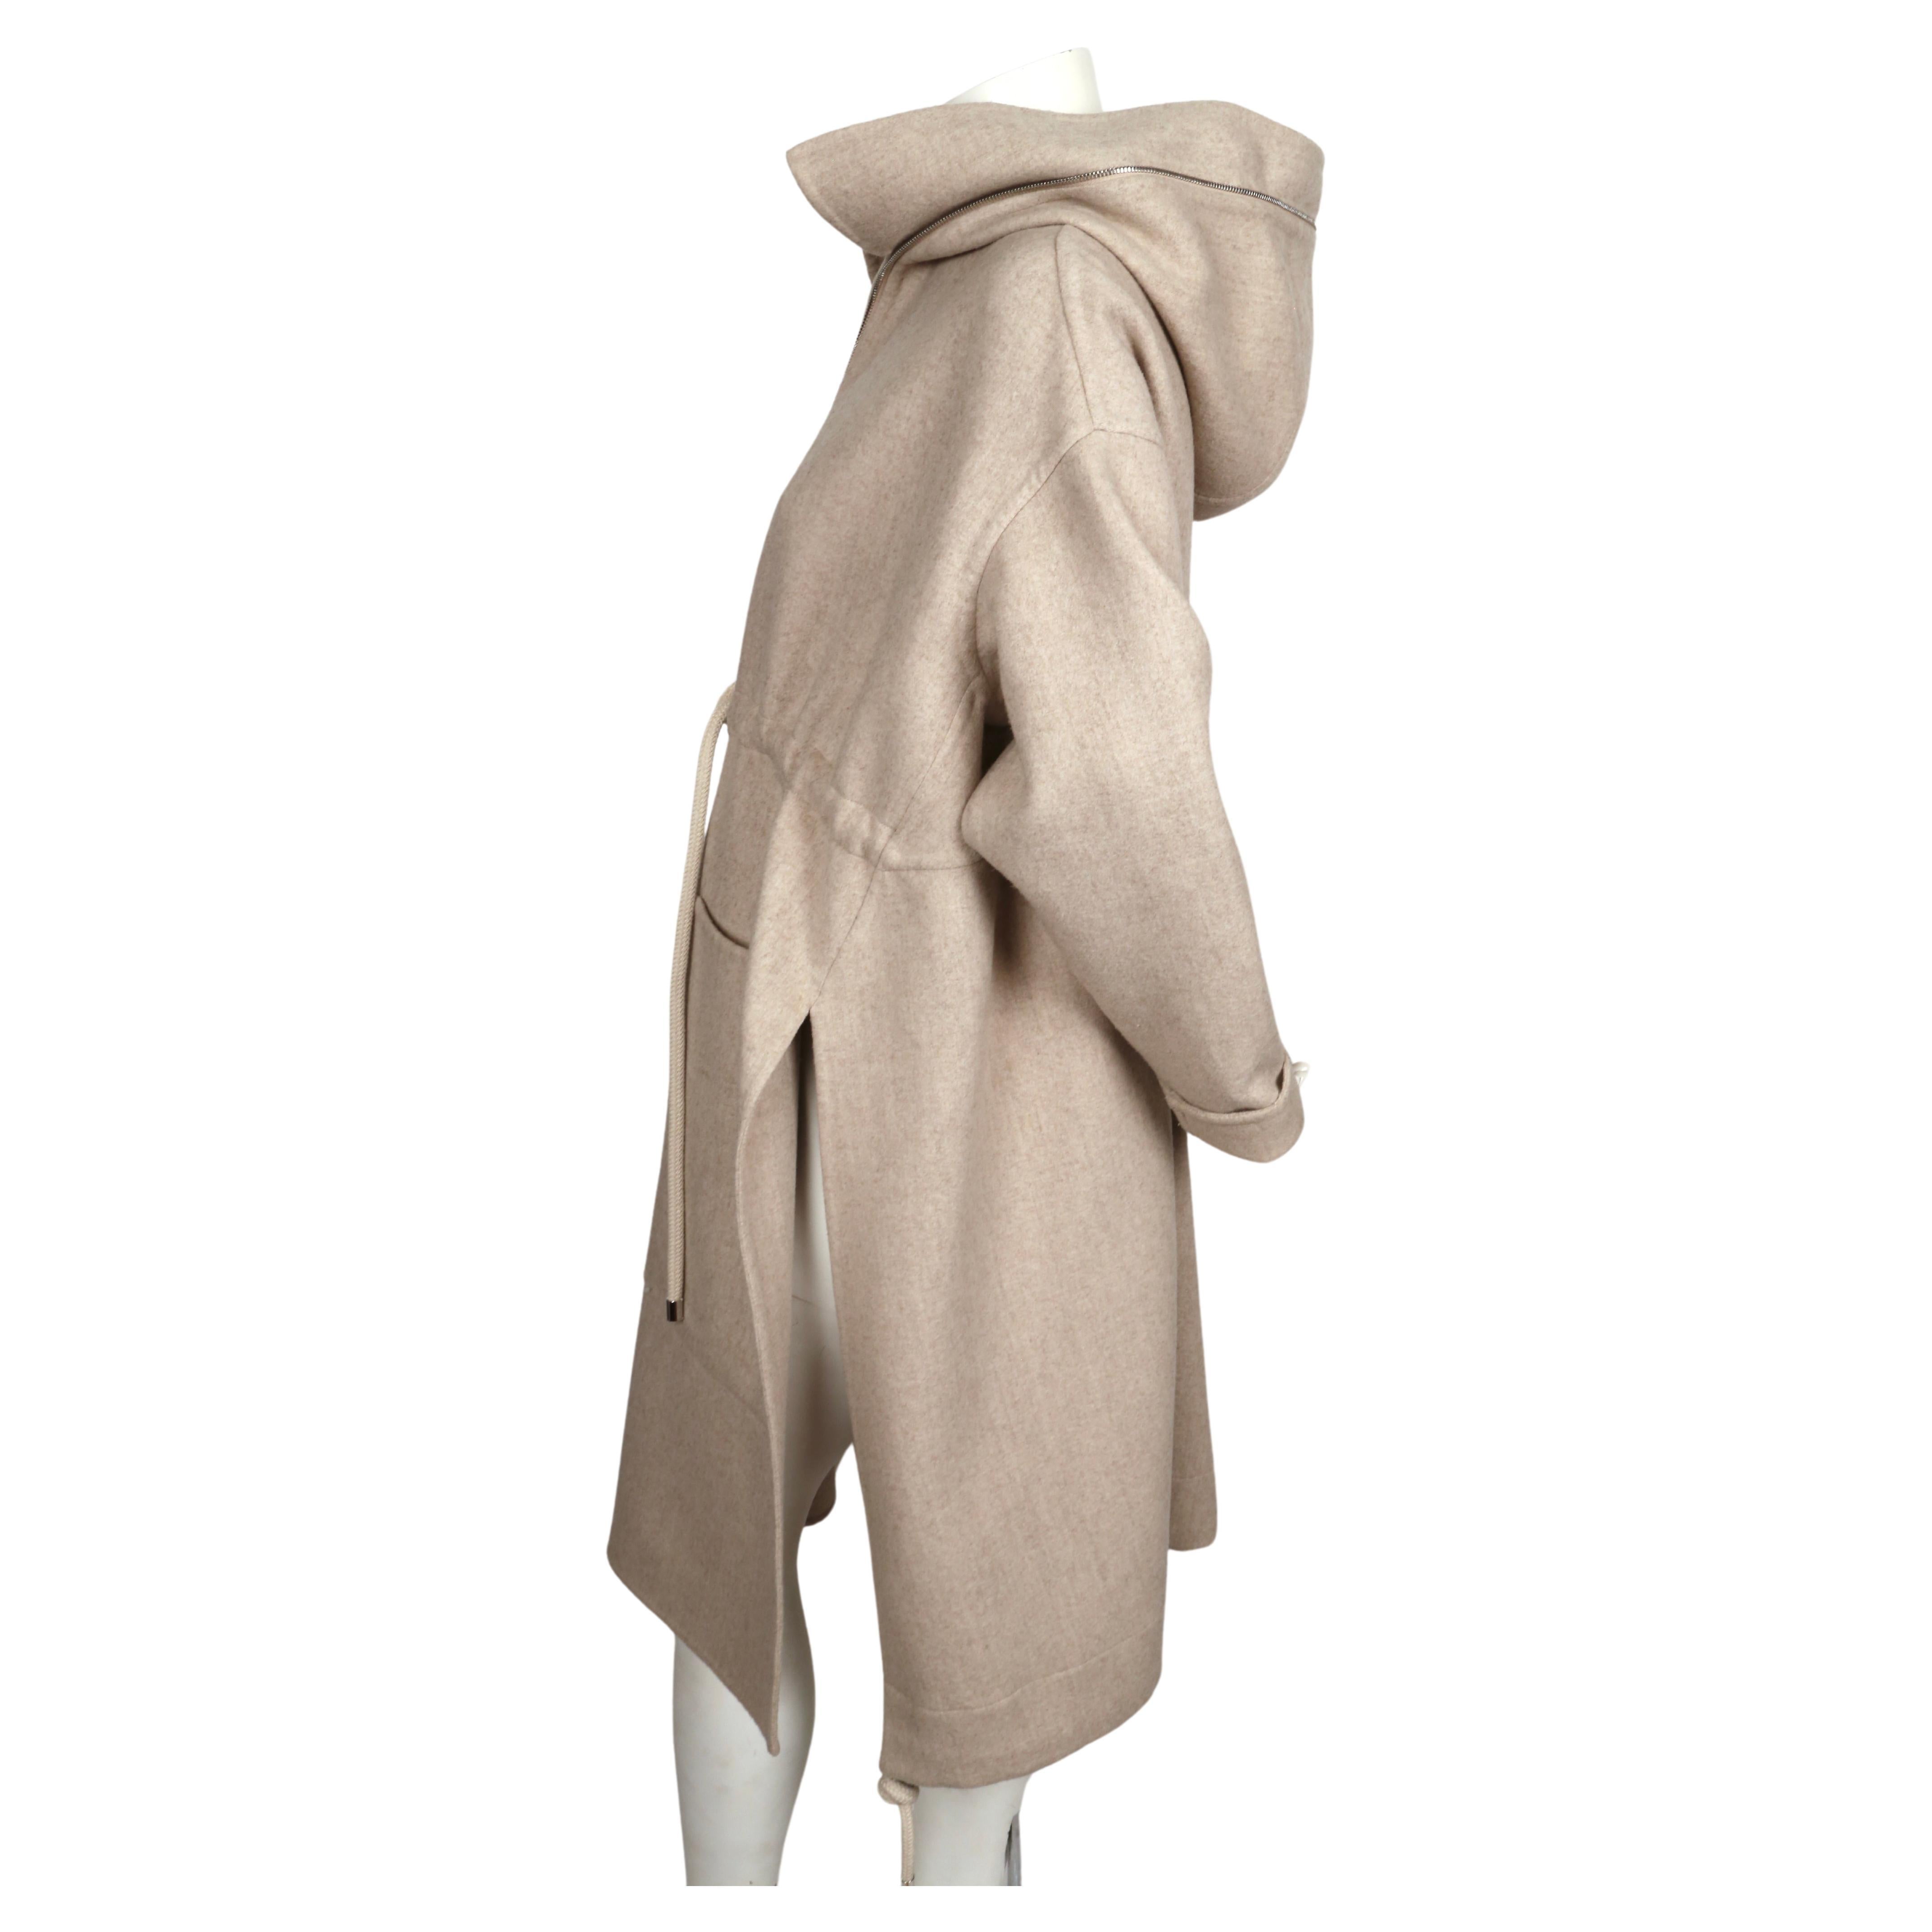 CELINE by PHOEBE PHILO oatmeal wool and cashmere coat with hood - resort 2016 In Good Condition For Sale In San Fransisco, CA